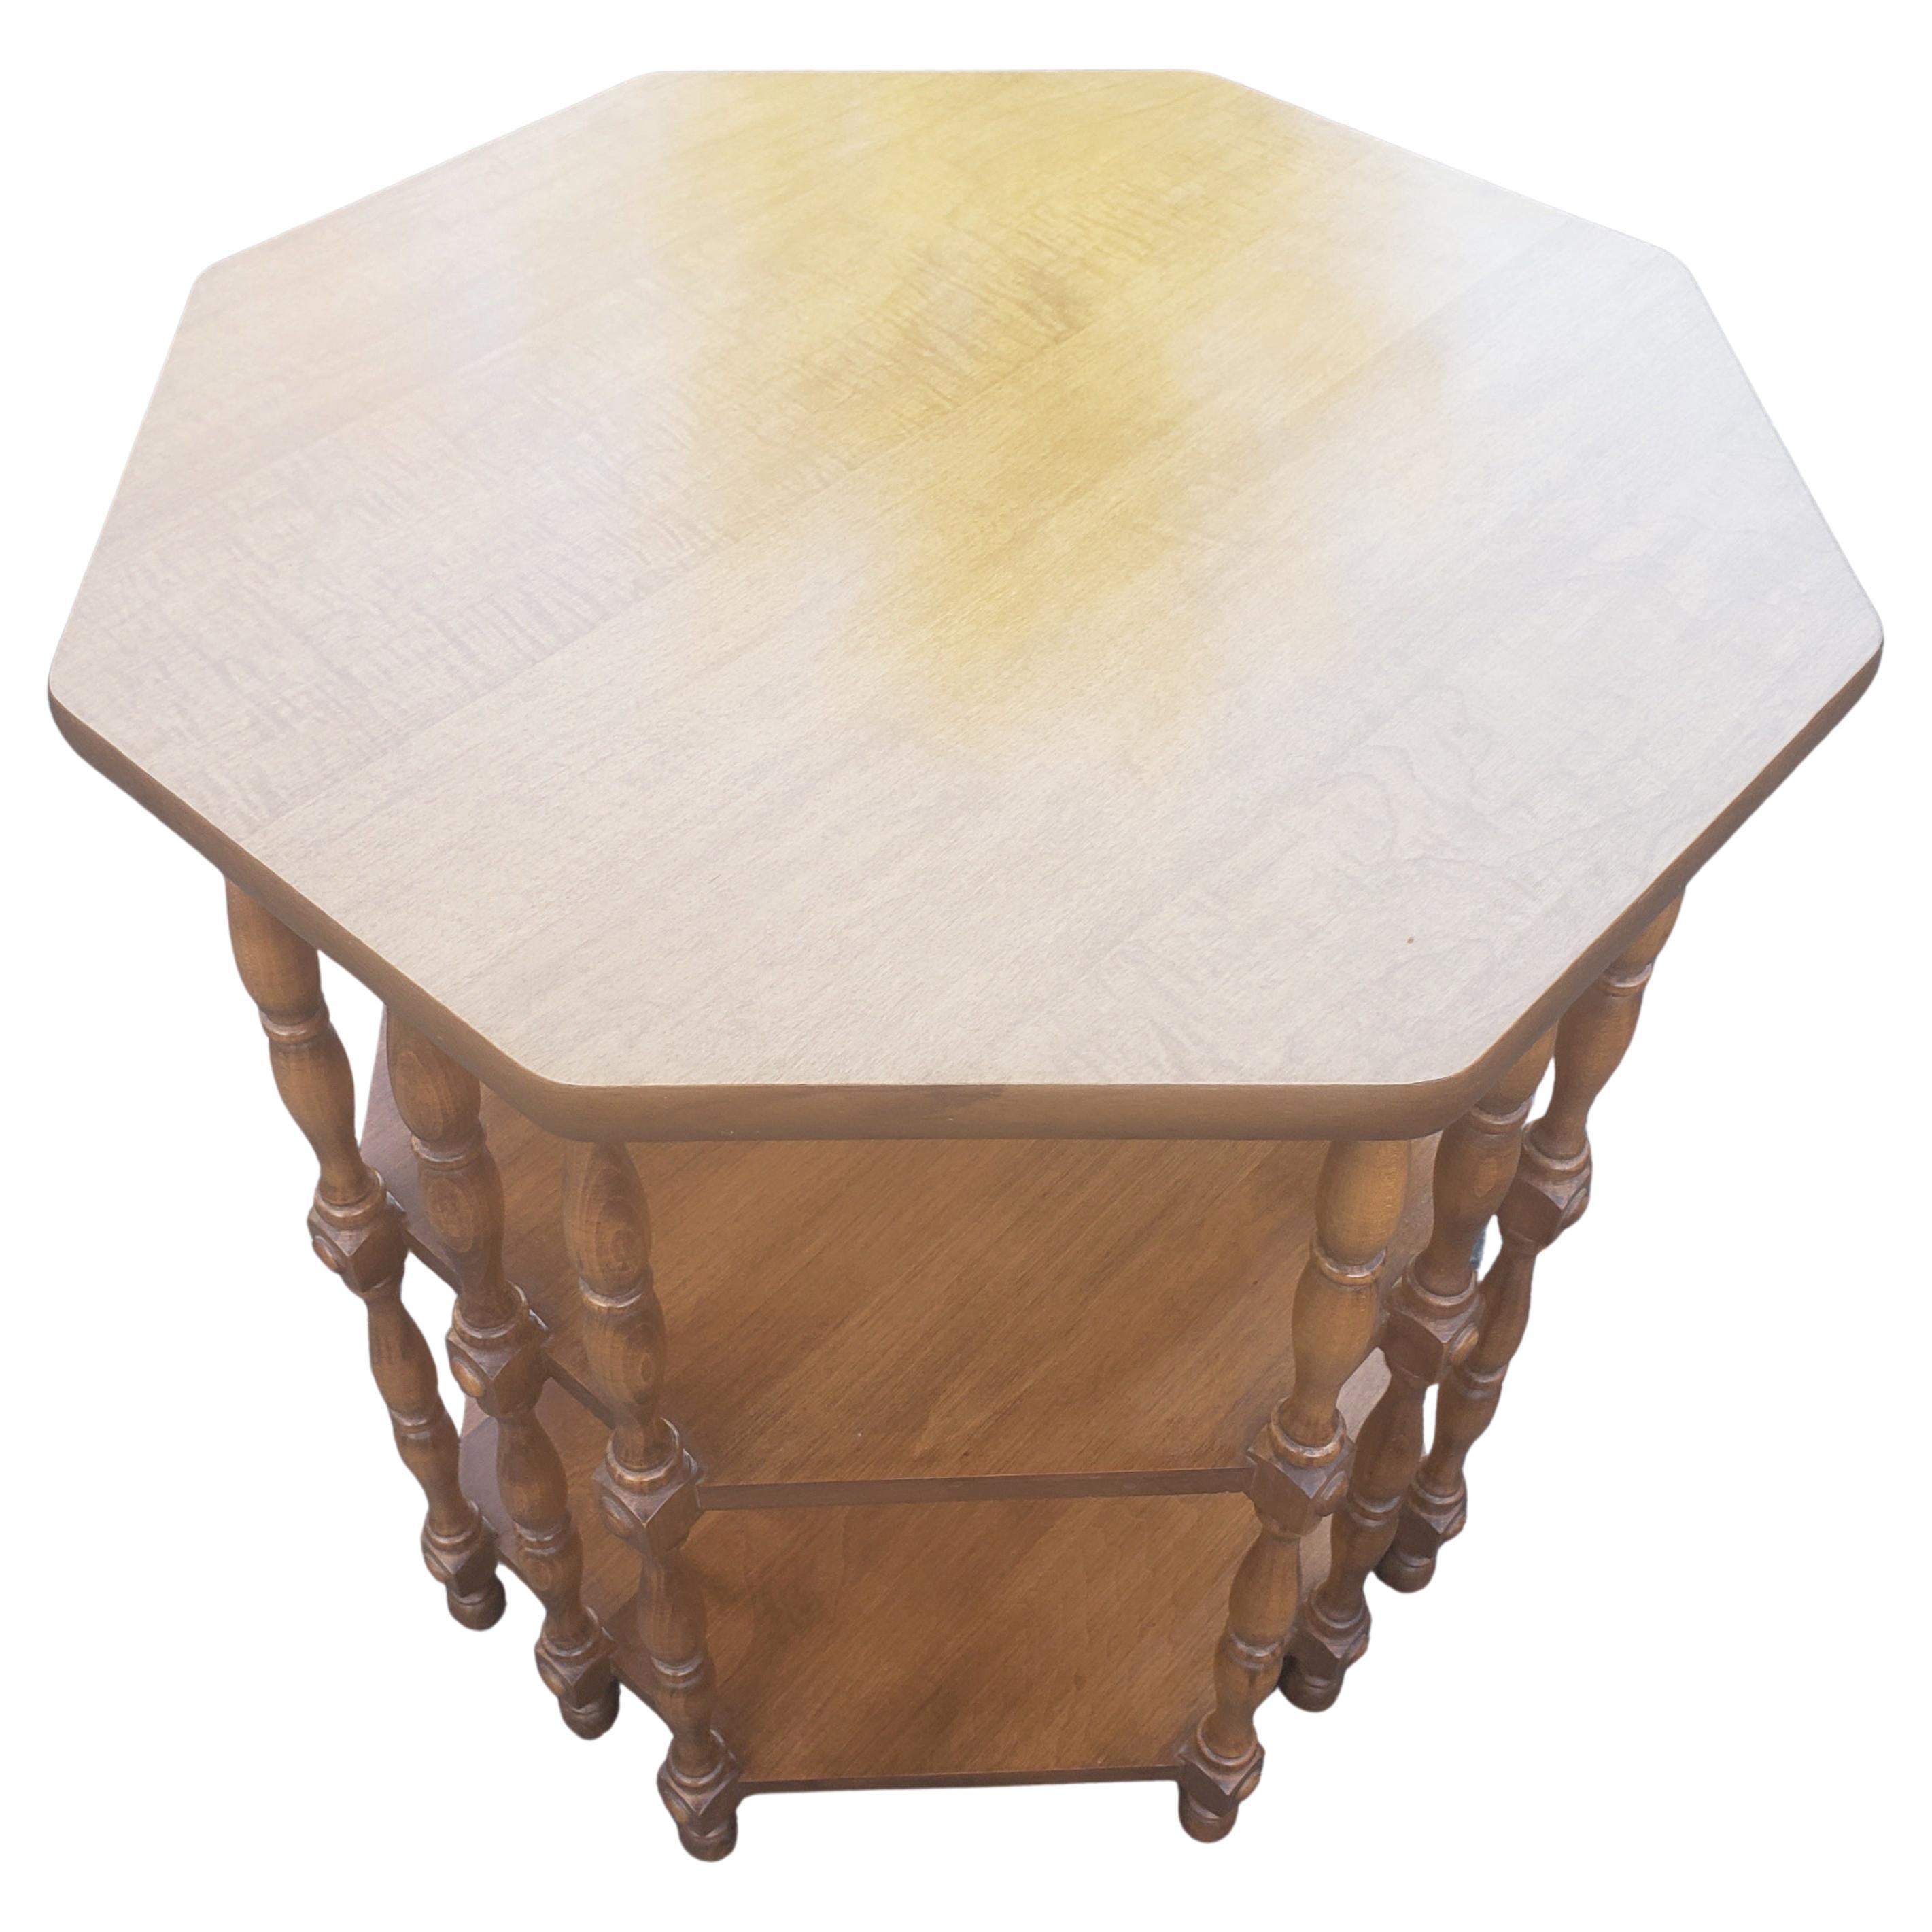 American Classical Pennsylvania House Vintage 3 Tier Solid Maple Octagonal Side Table, Circa 1970s For Sale